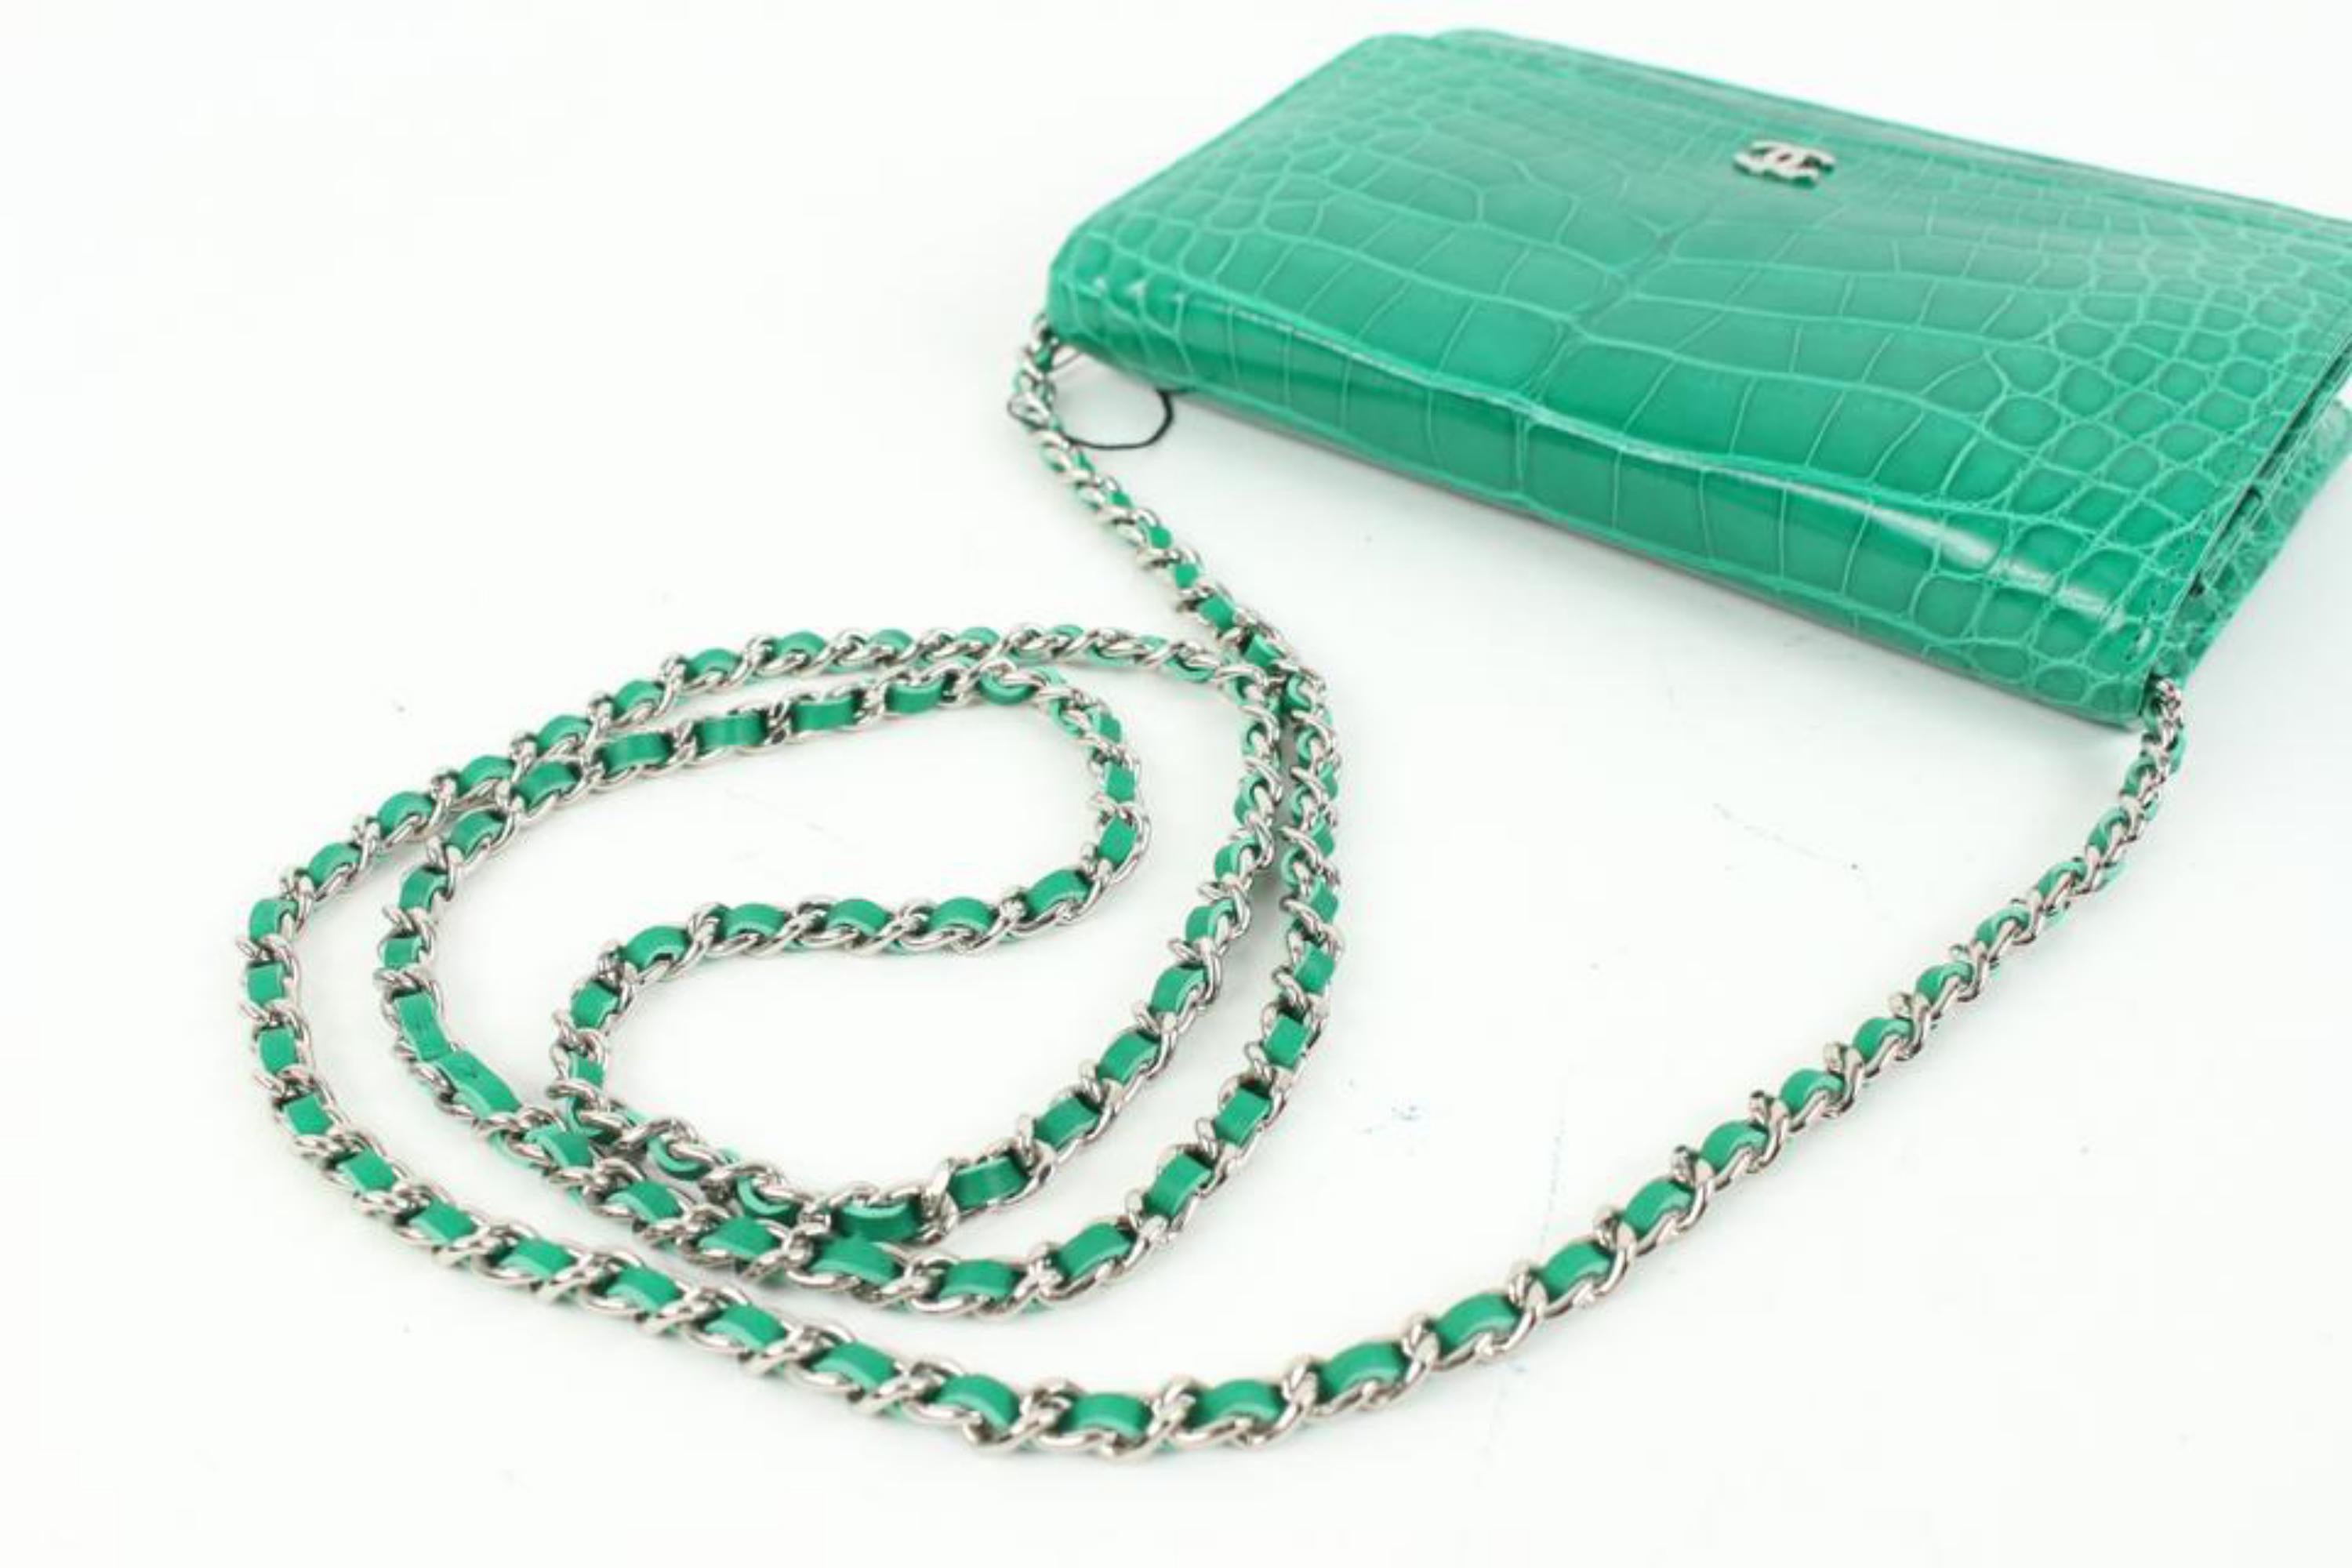 Chanel Ultra Rare Emerald Green Alligator Wallet on Chain SHW WOC 46cz414s In New Condition For Sale In Dix hills, NY